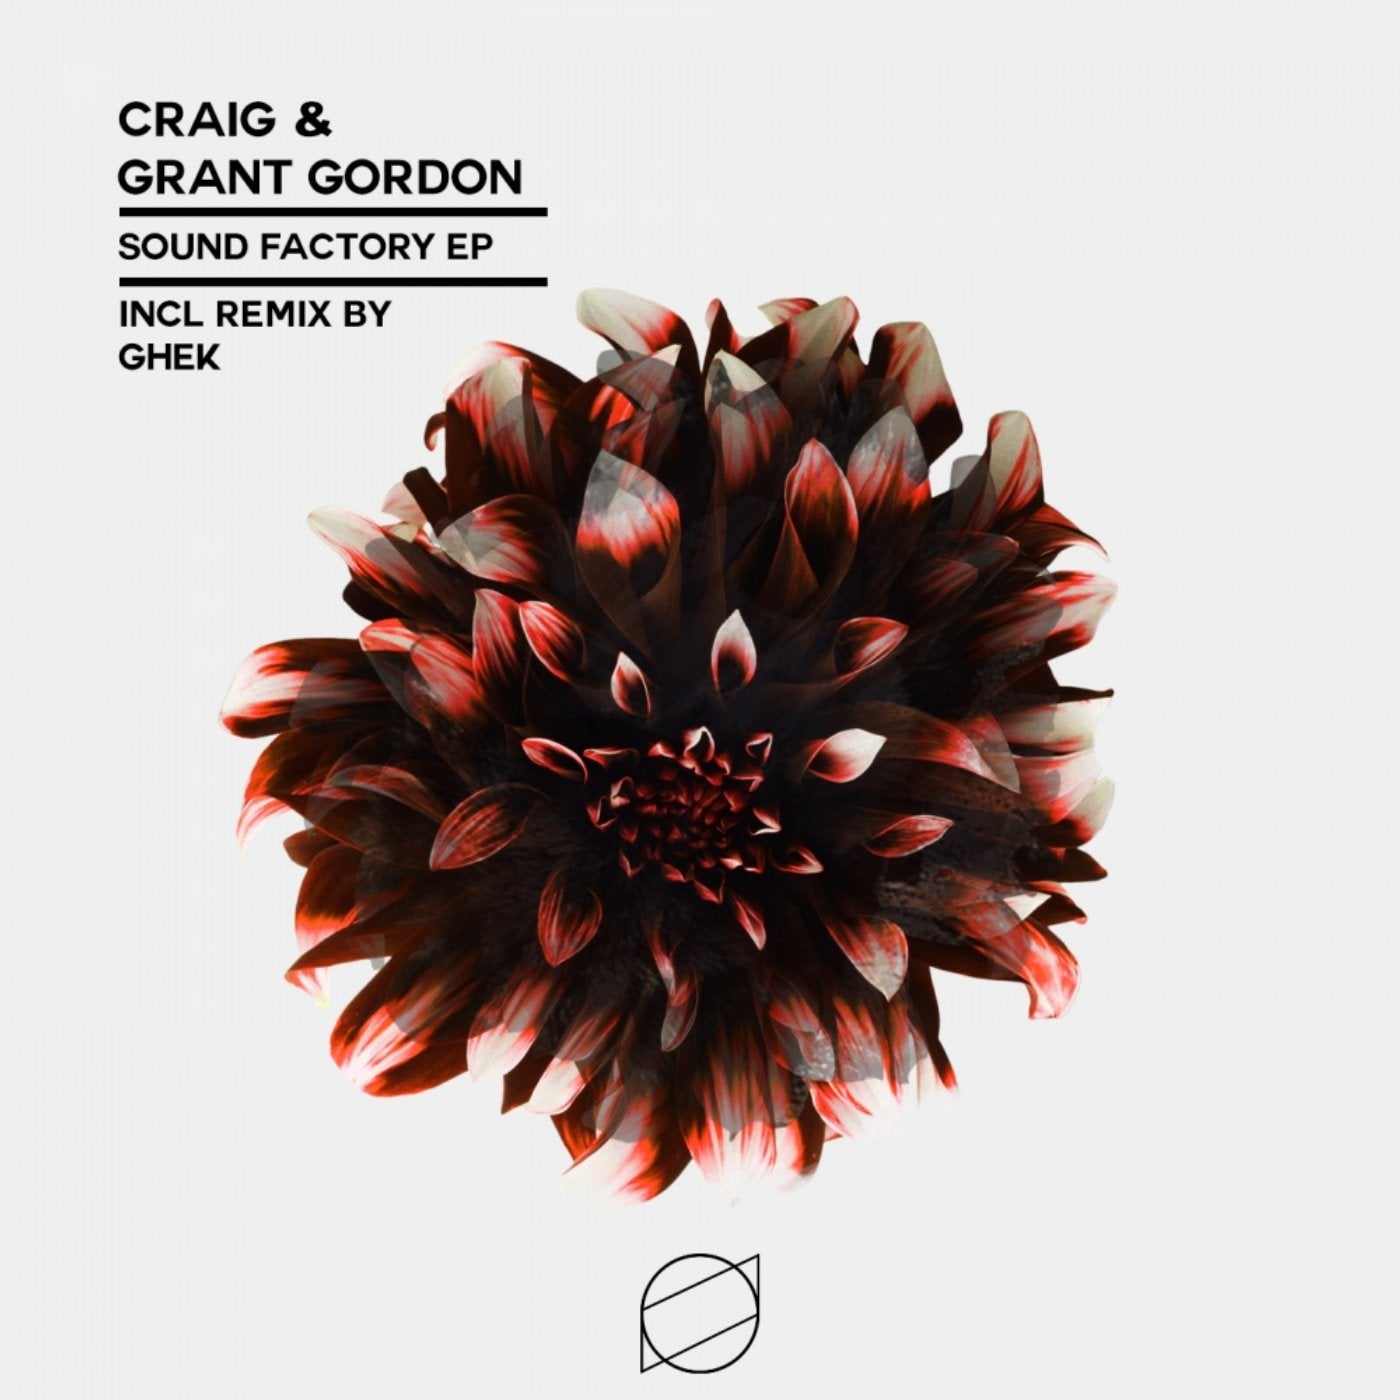 Sound Factory EP